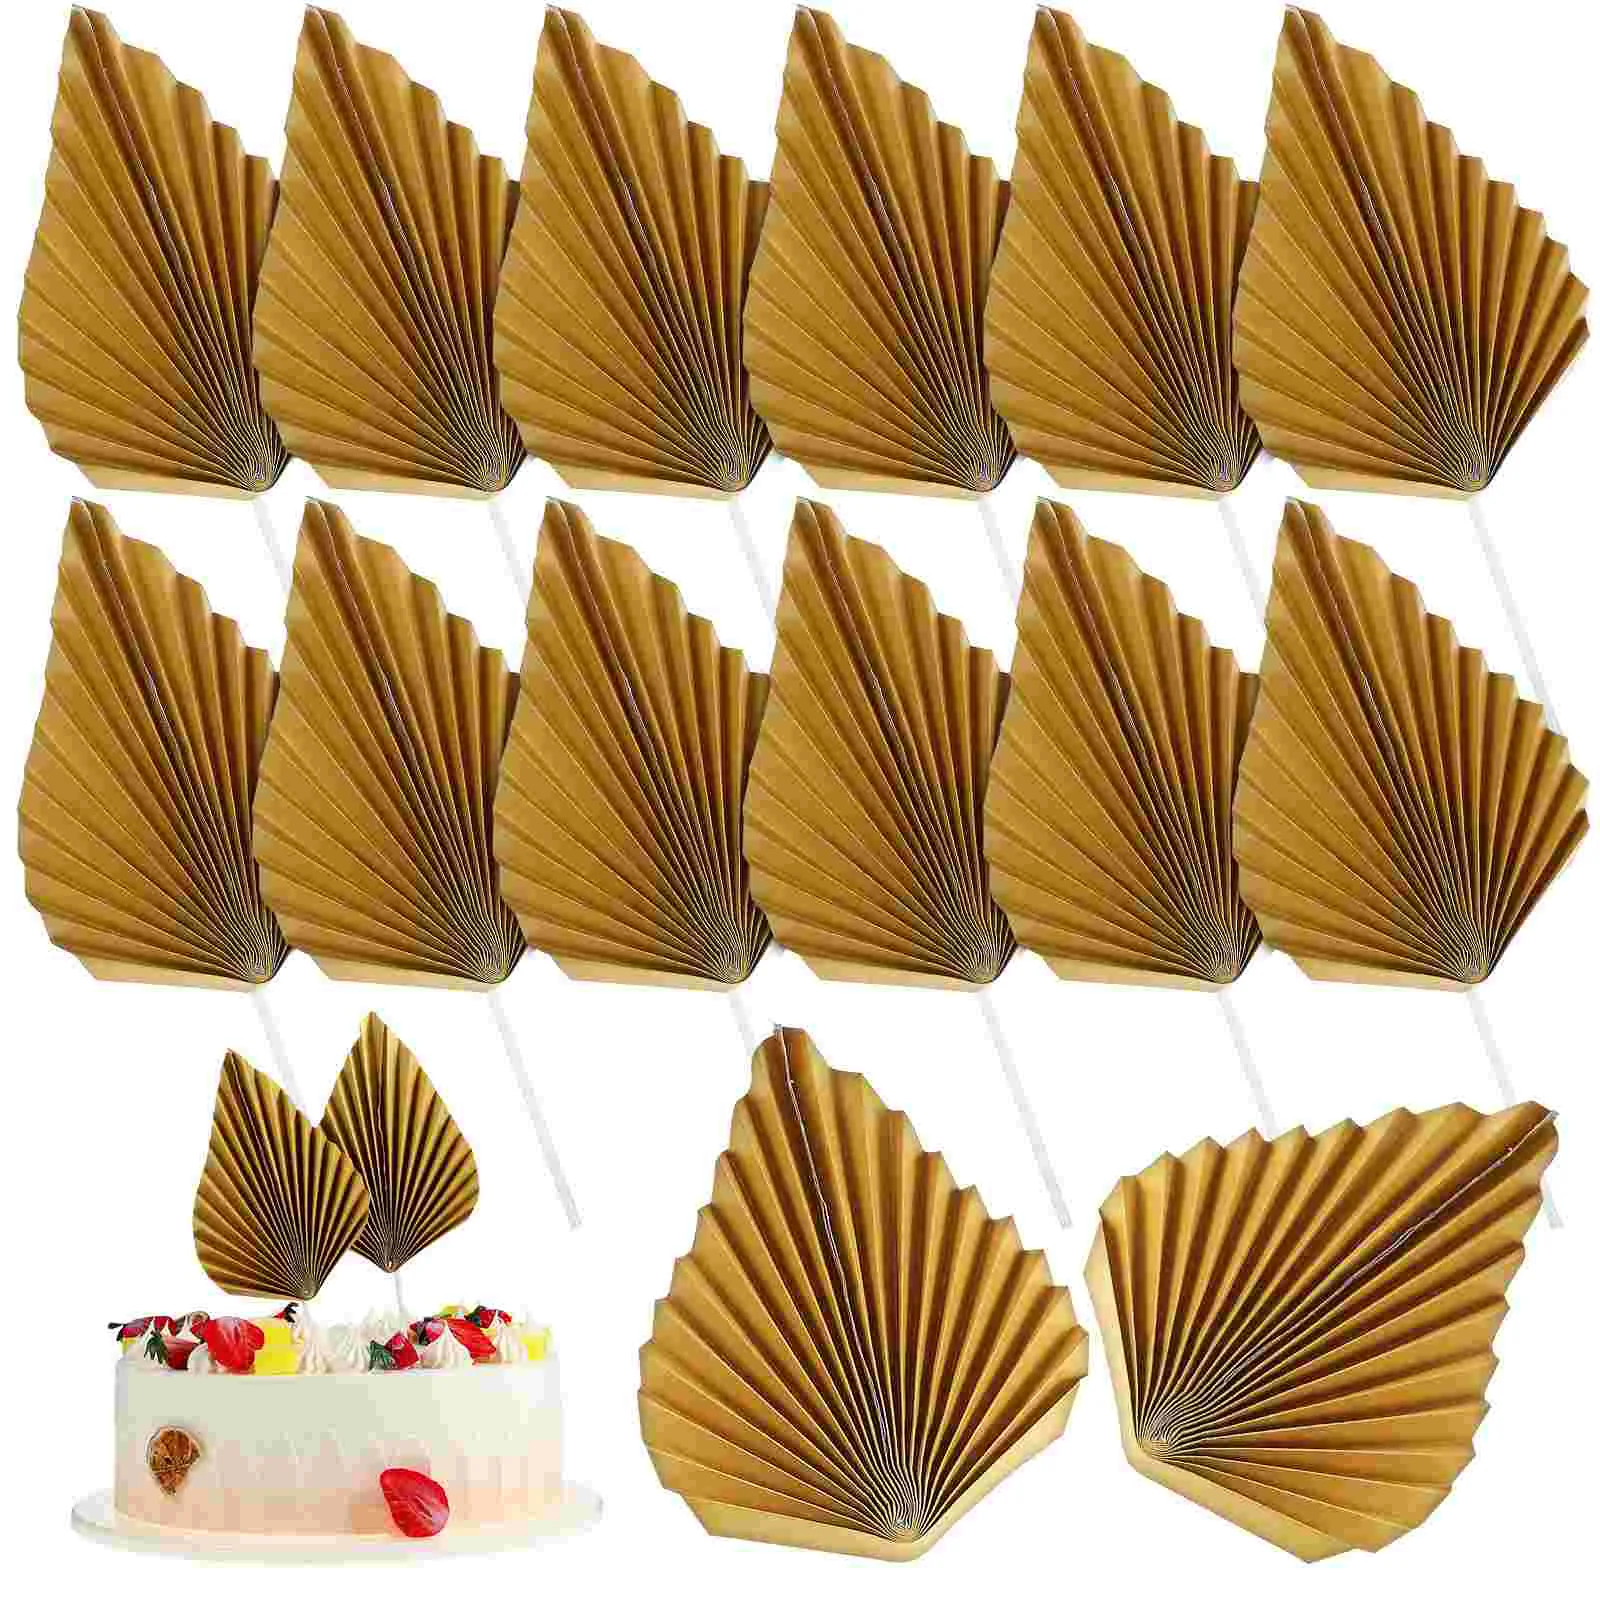 

24 Pcs Golden Leaf Cupcake Toppers Green Derby Hat Wedding Cupcakes Topper Cake Picks Wedding Ceremony Decorations